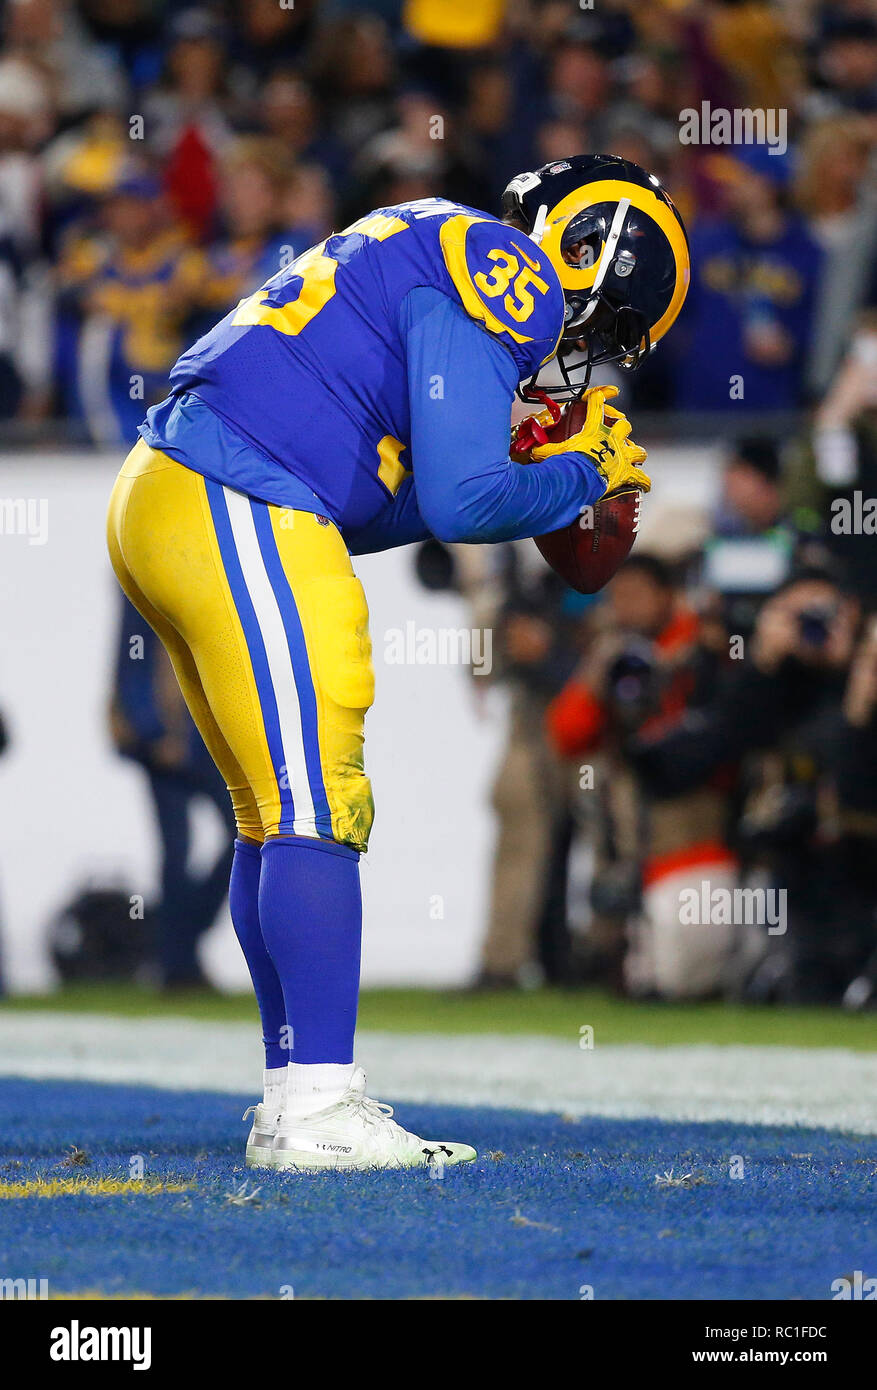 Los Angeles, California, USA. January 12, 2019 Los Angeles Rams running back C.J. Anderson #35 celebrates after scoring a touchdown during the NFC Divisional Round playoff game between the game between the Los Angeles Rams and the Dallas Cowboys at the Los Angeles Coliseum in Los Angeles, California. Charles Baus/CSM. Credit: Cal Sport Media/Alamy Live News Stock Photo